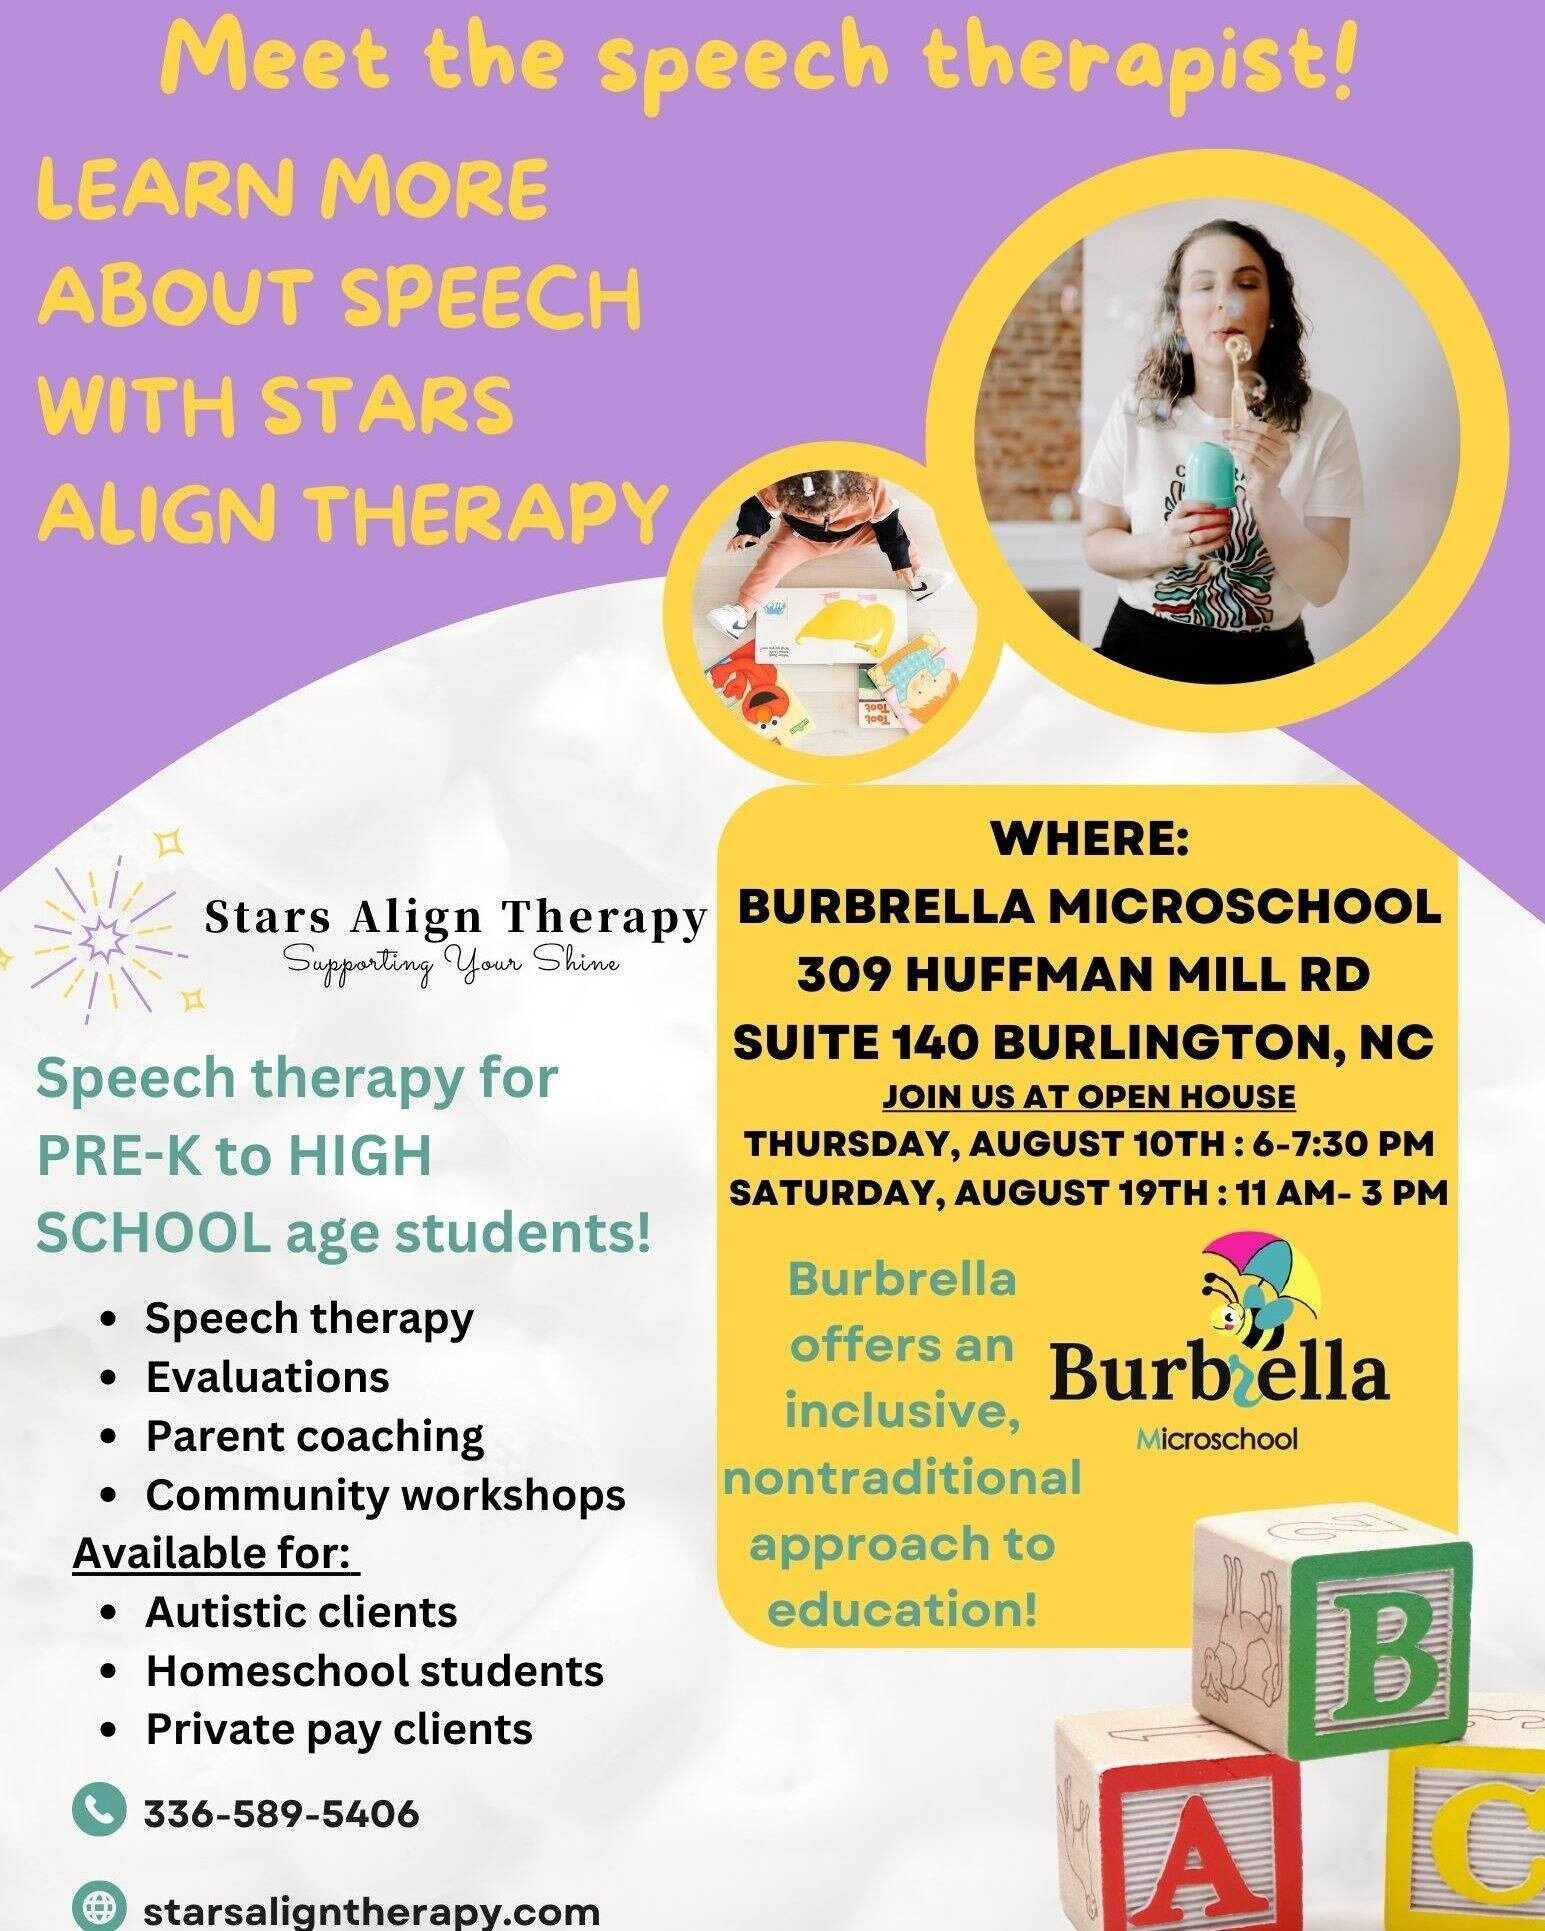 I will be attending Burbrella Microschool's upcoming open house events! 
Come say hi and learn more about your speech therapy and schooling options for 2023! 
🤩When: Thursday, August 10th at 6-7:30 pm OR Saturday, August 19th 11 am-3 pm
🤩Where: Bur